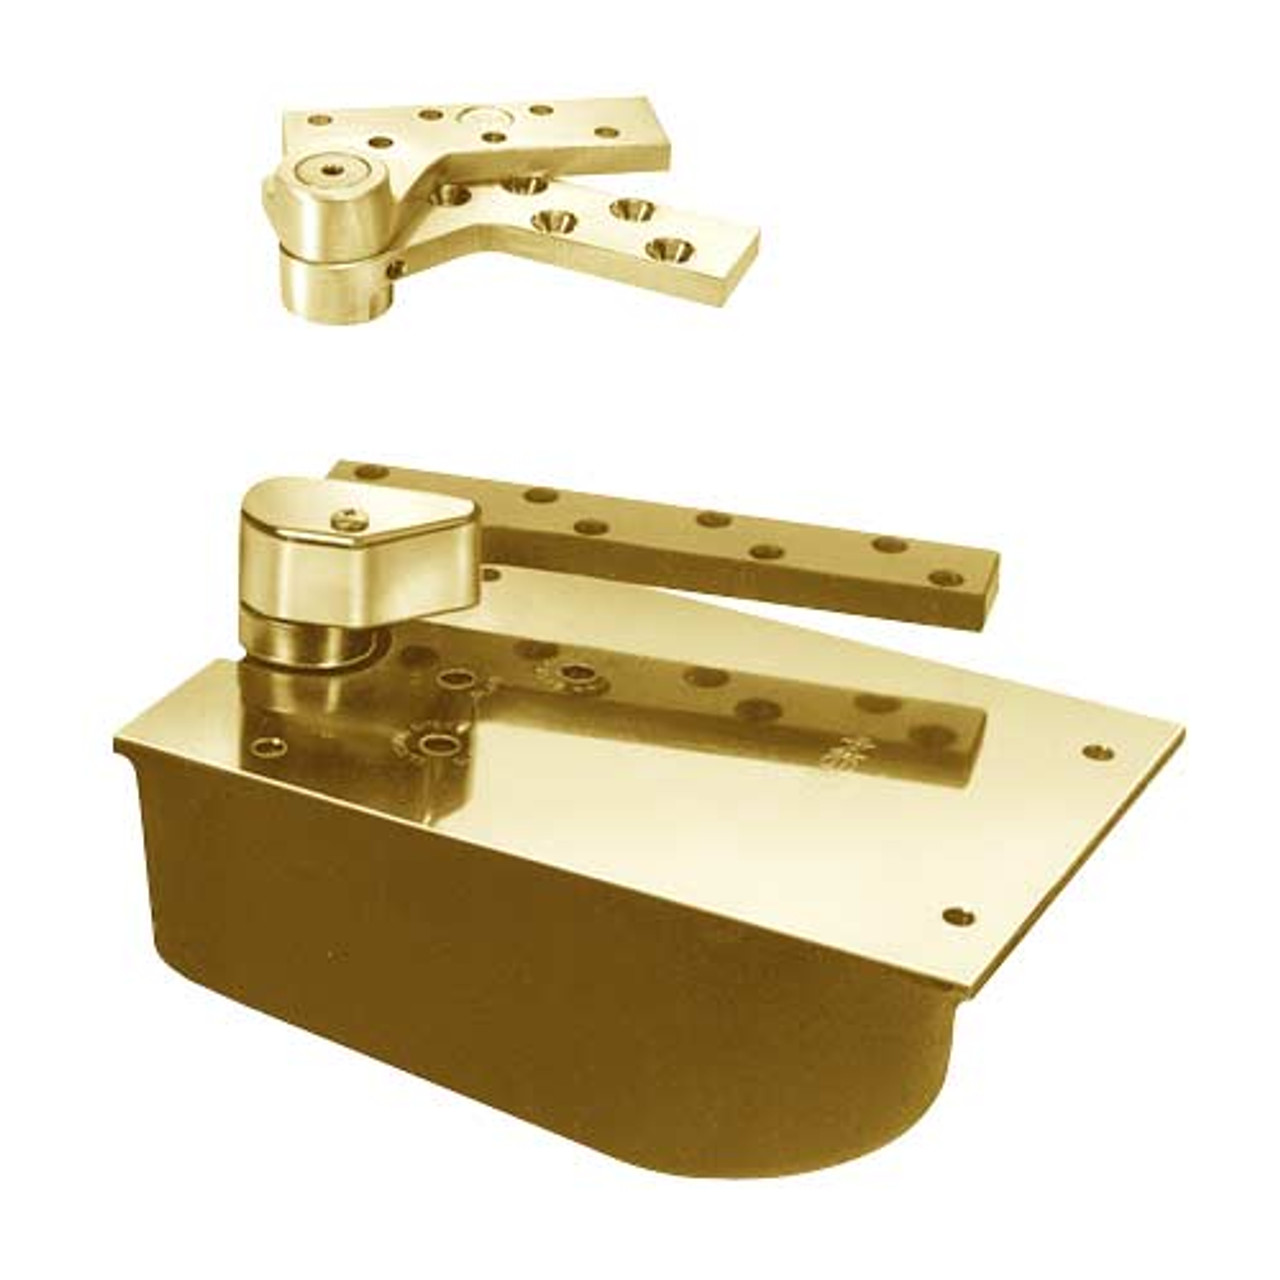 L27-90S-LFP-CWF-LH-605 Rixson 27 Series Extra Heavy Duty Lead Lined Offset Floor Closer in Bright Brass Finish